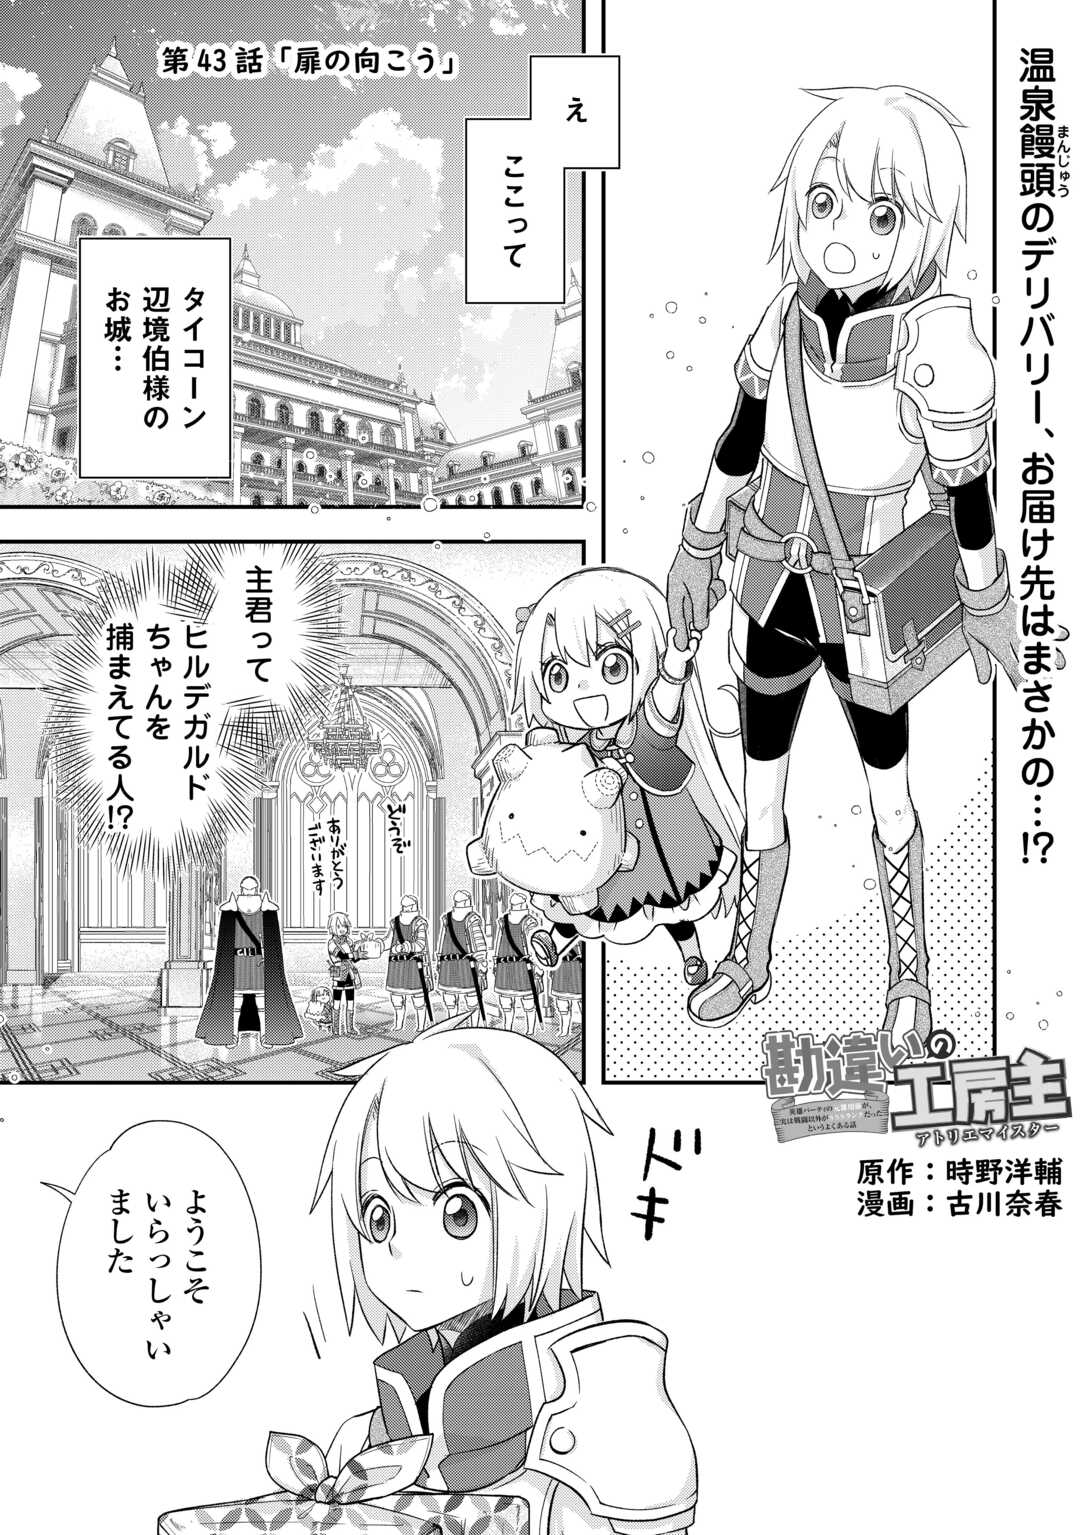 Kanchigai no Atelier Meister - Chapter 43 - Page 1